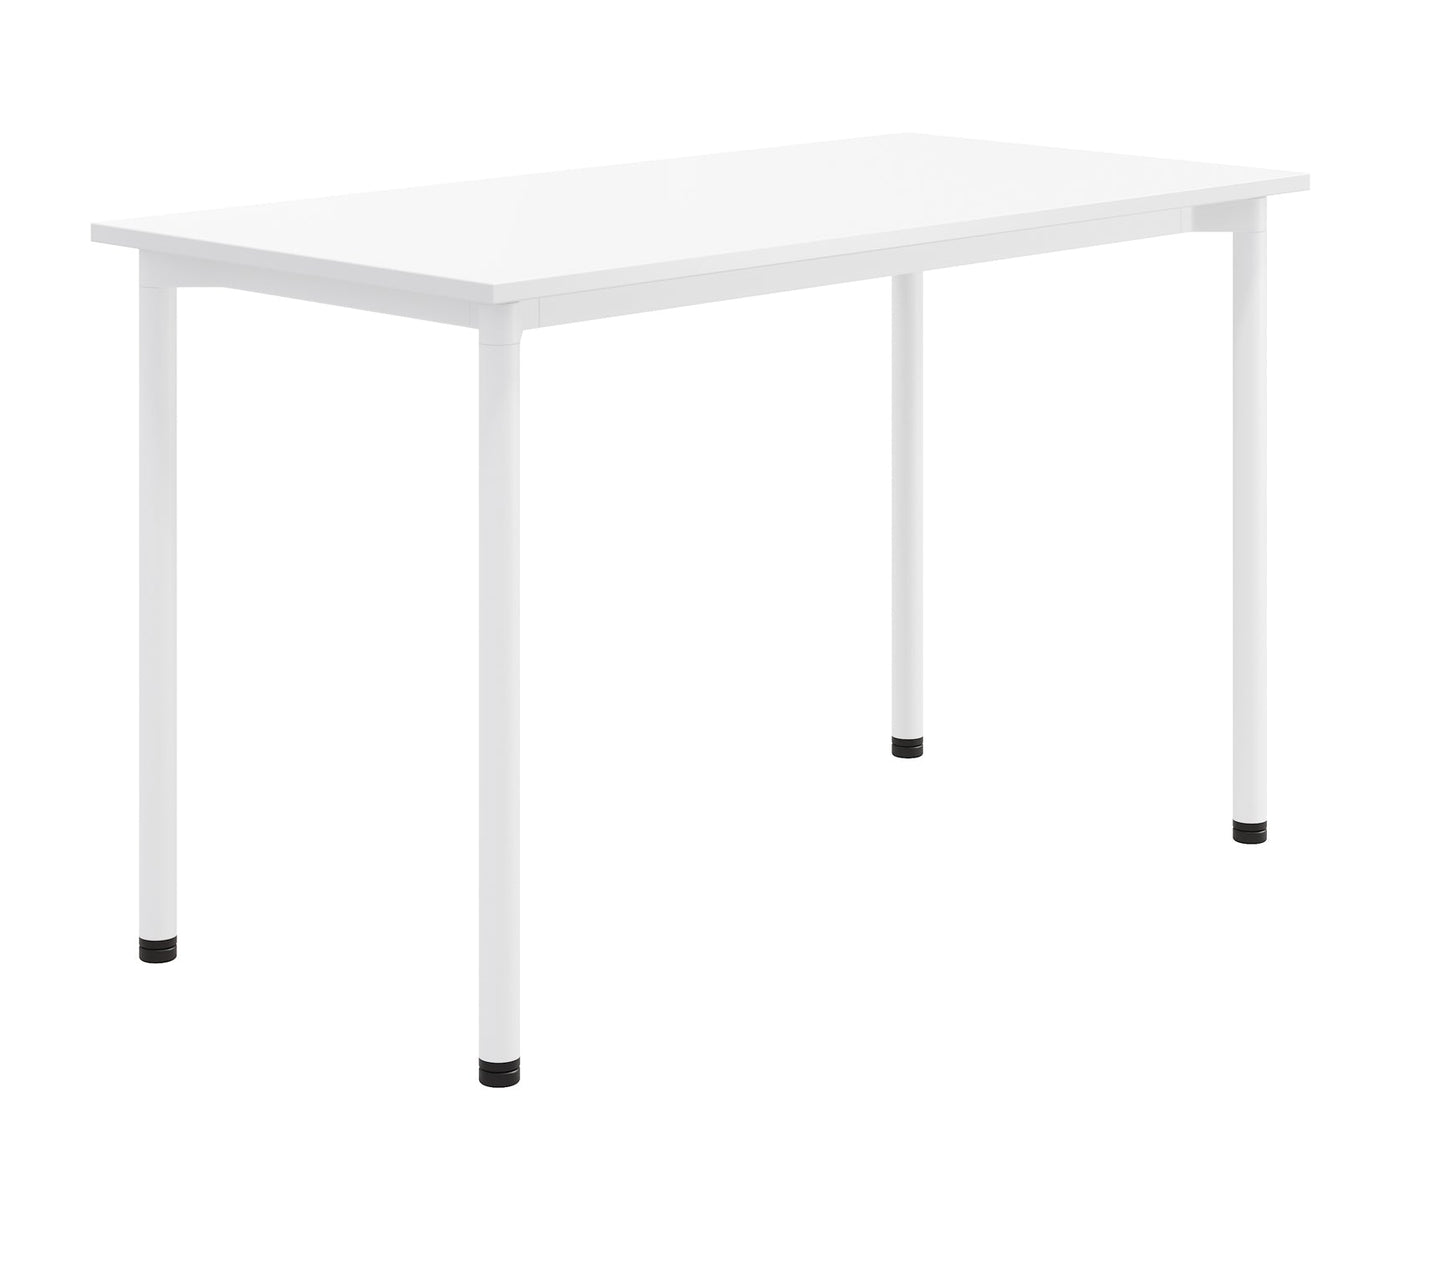 Load image into Gallery viewer, Dailey Table by KFI Studios - Wholesale Office Furniture
